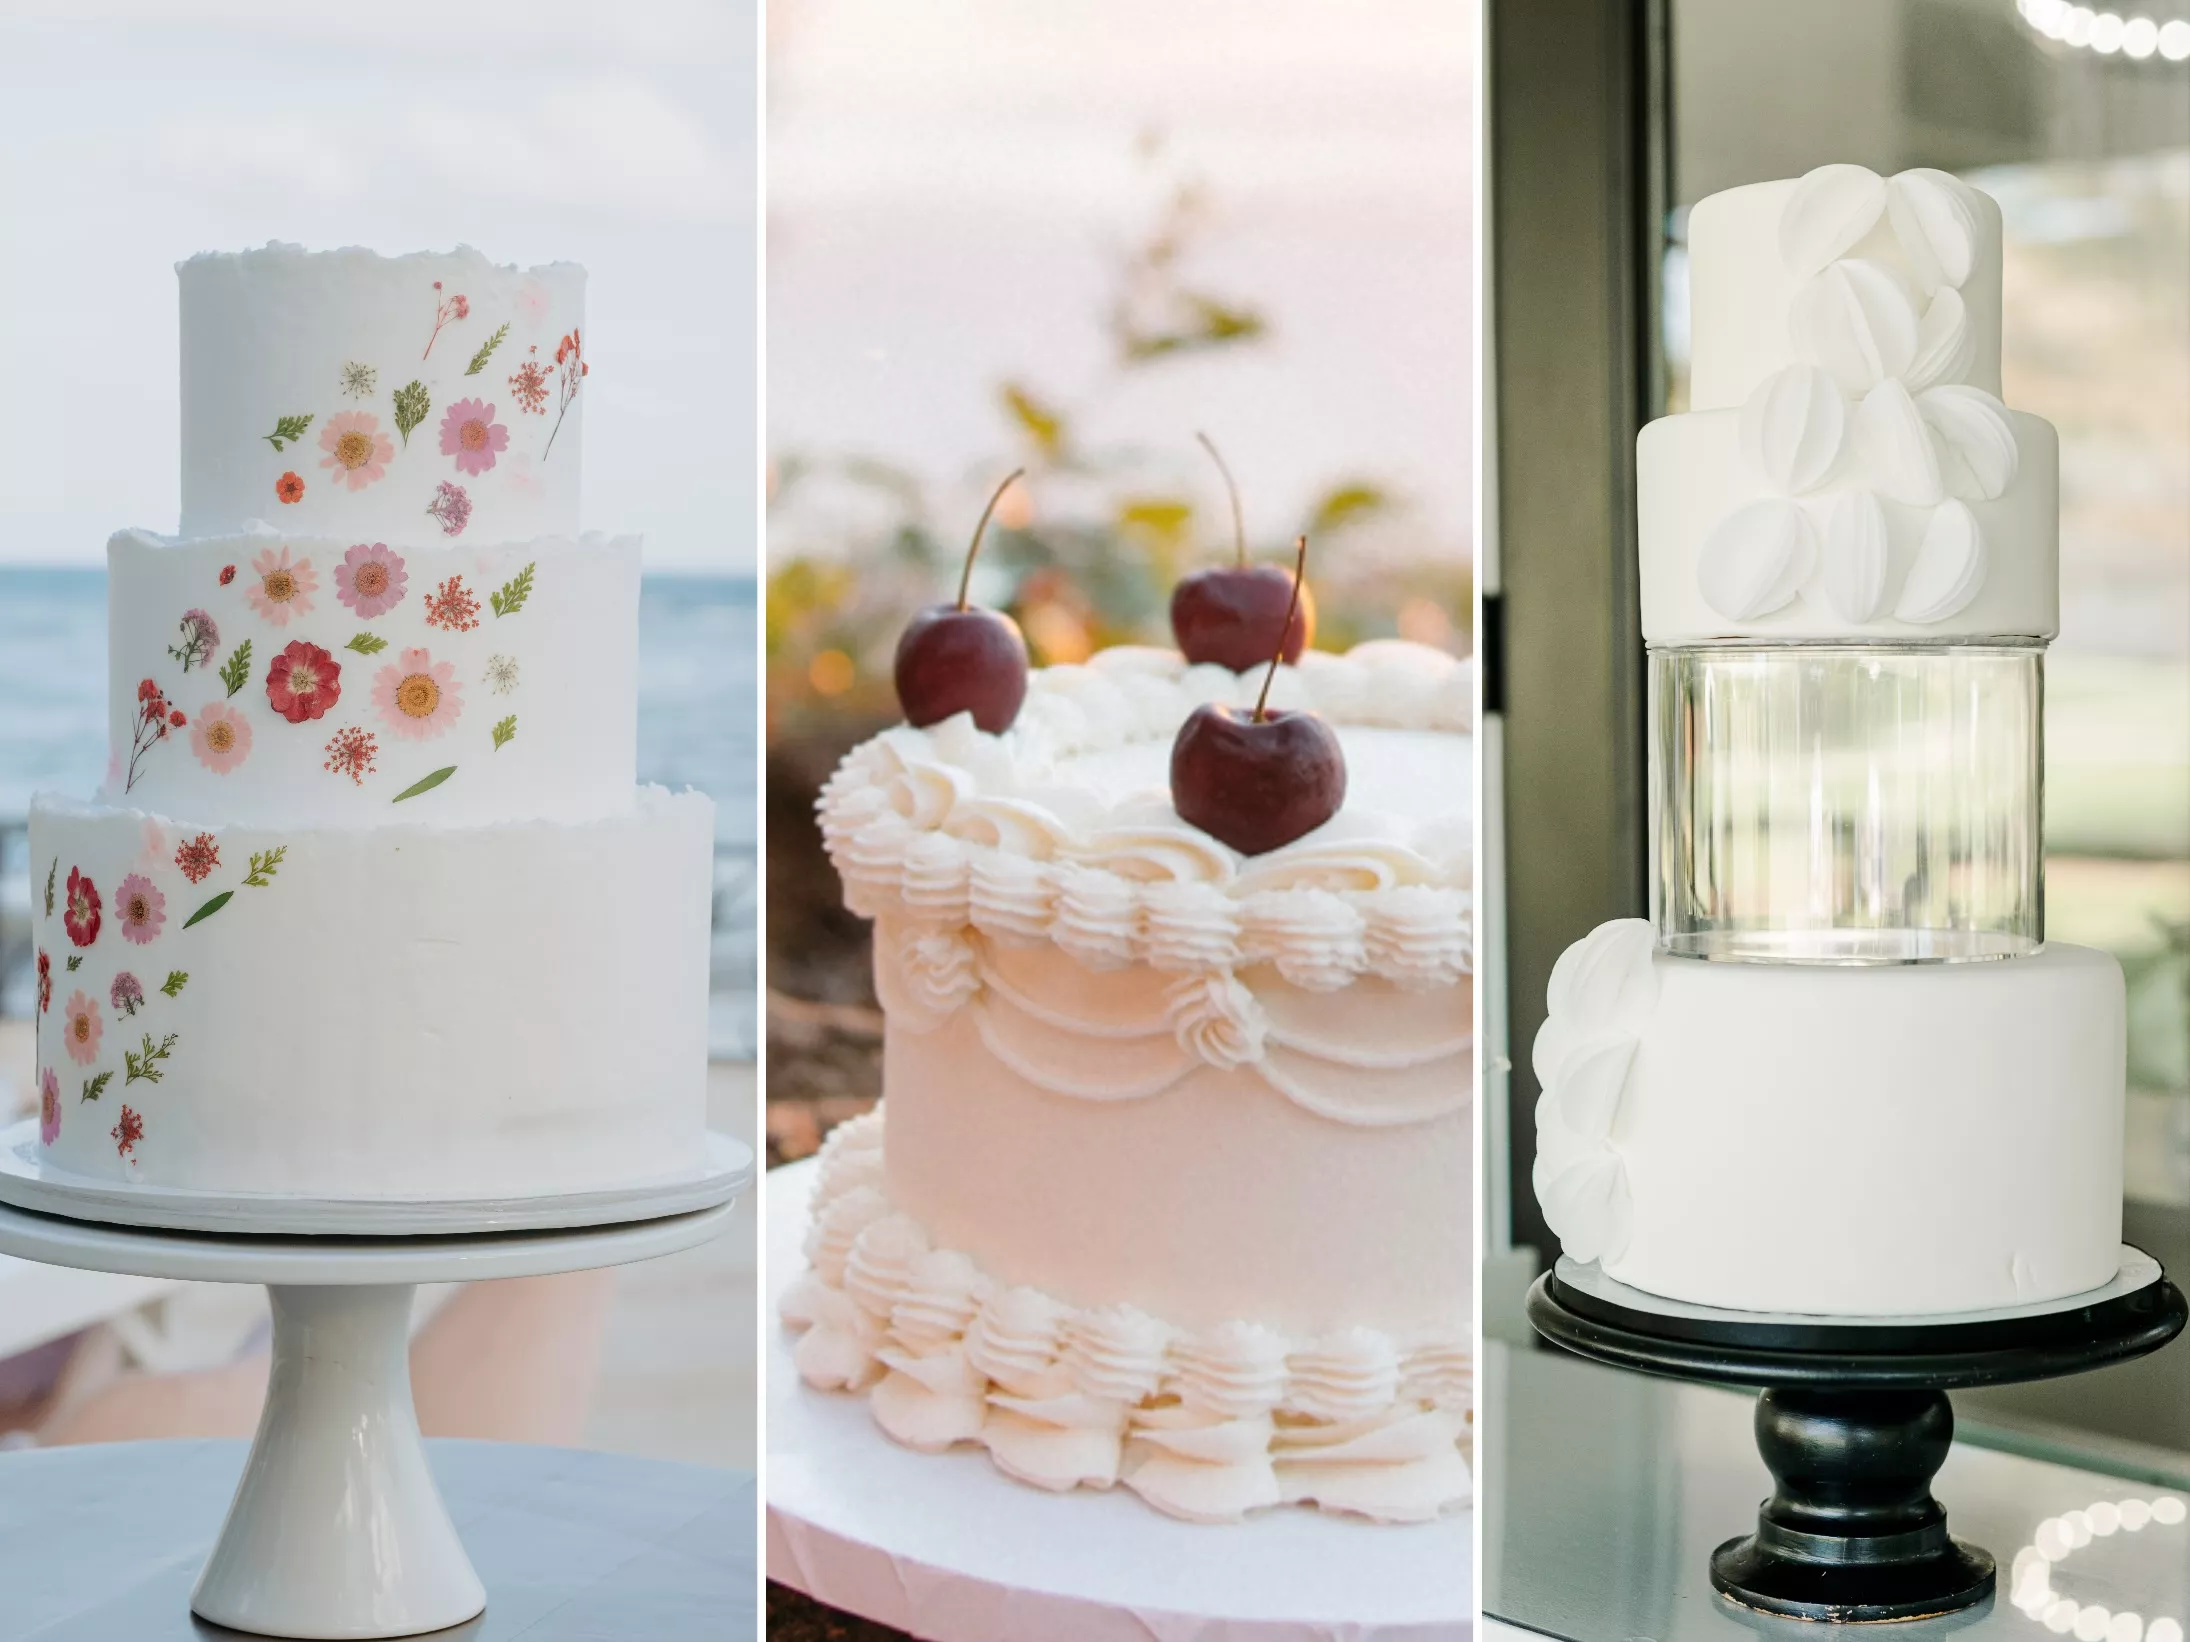 Choose Your Ideal Wedding Cake Following Step by Step